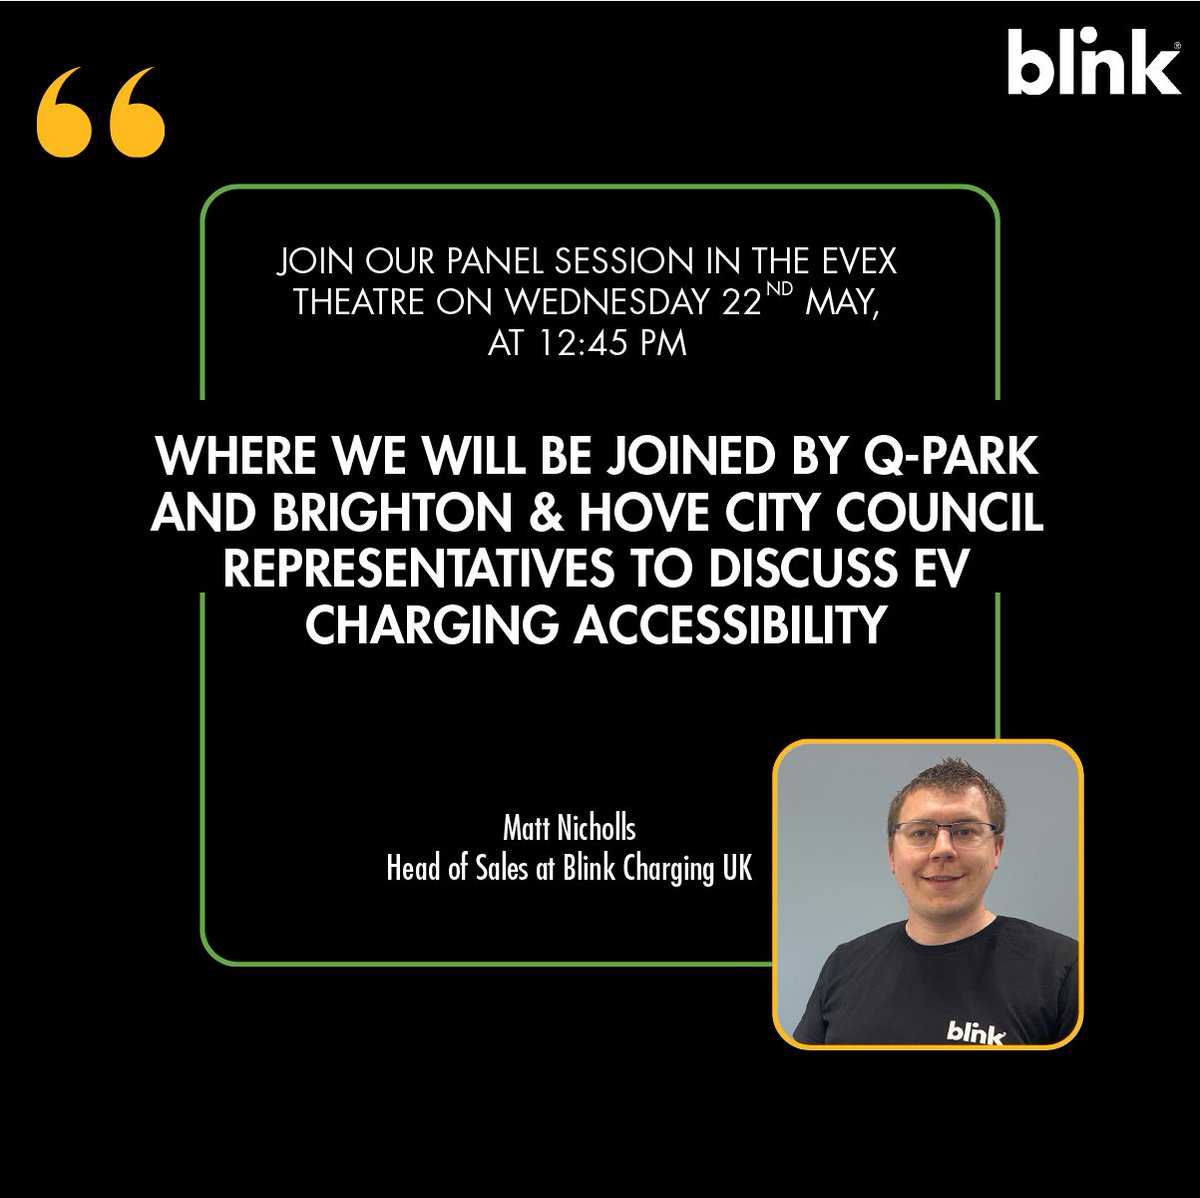 Join Matt Nicholls and guests from Q-Park UK&I and Brighton & Hove City Council in the EVex Theatre Parkex on Wednesday 22nd May as they discuss all things #EVChargingAccessibility. 👉 ow.ly/BuTq50RIAhL #Blink #Accessibility #EVInnovations